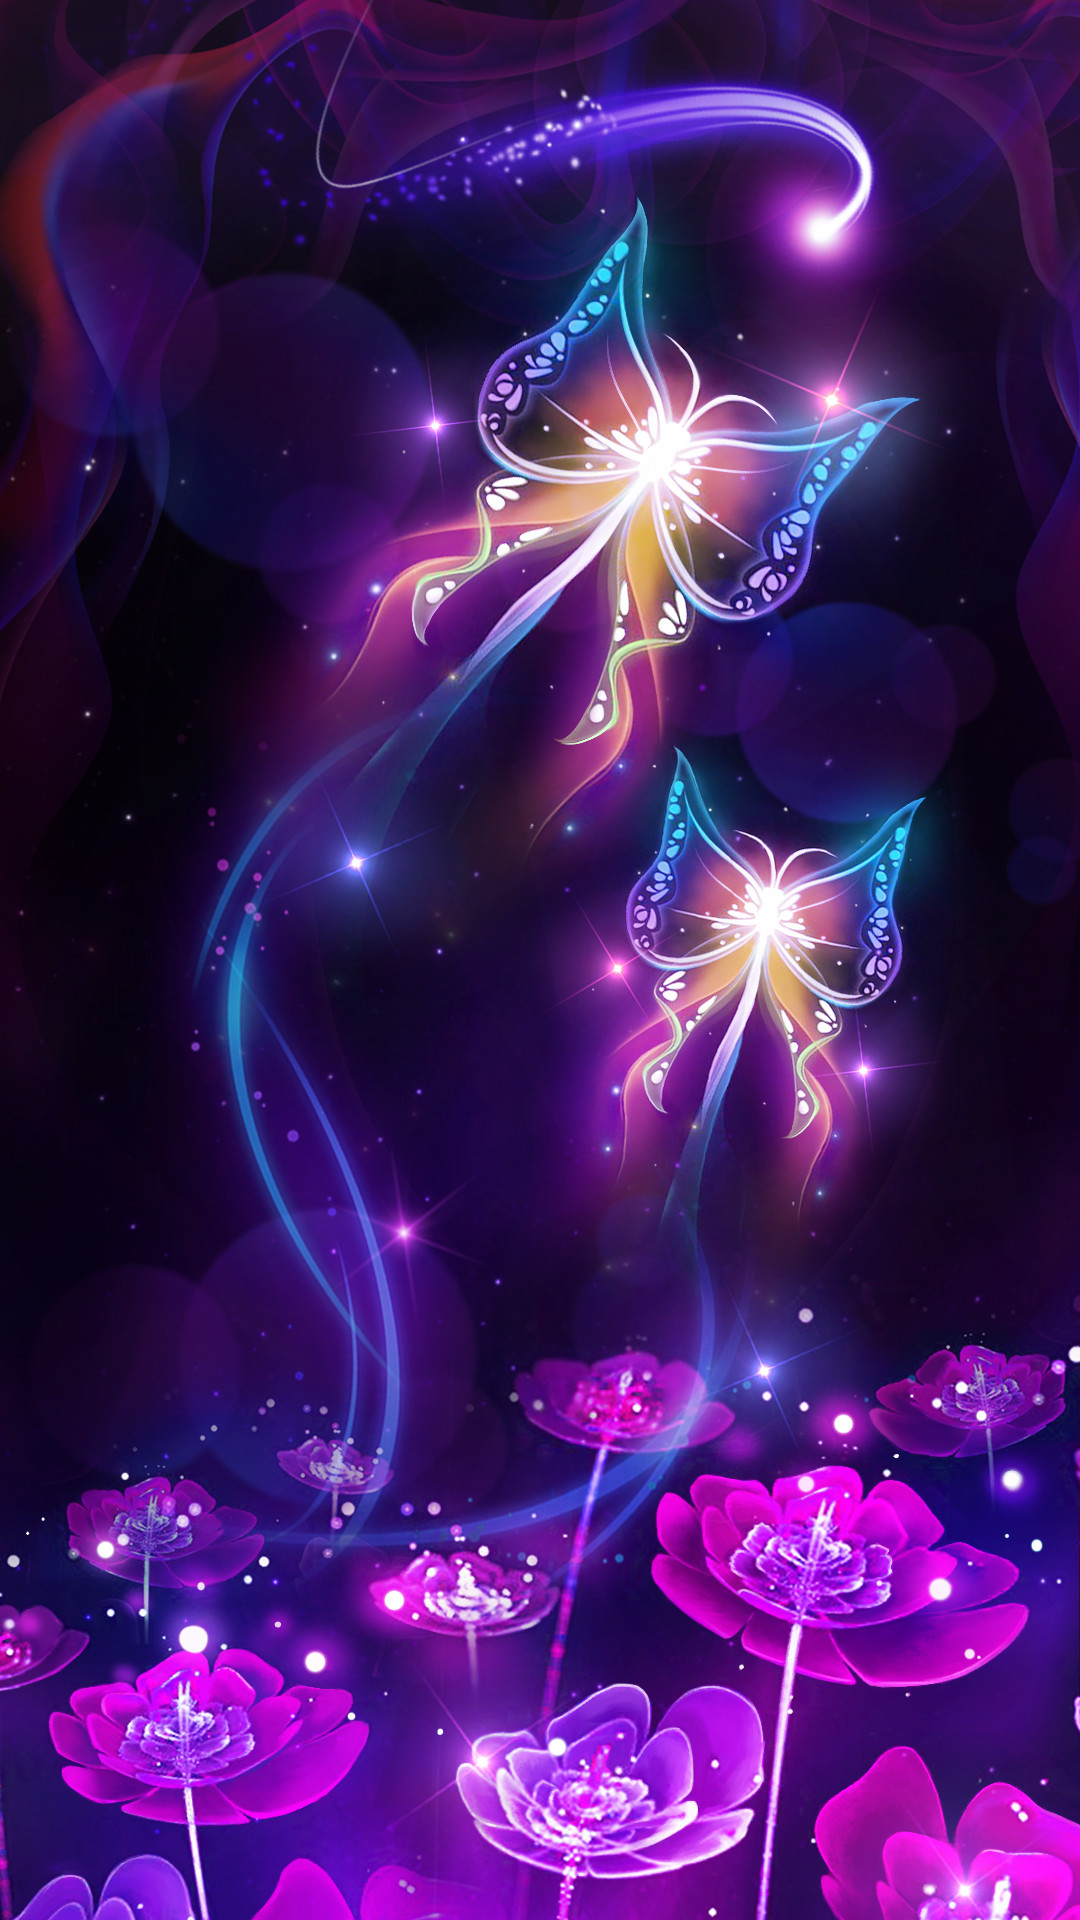 1080x1920  Shiny neon butterfly live wallpaper! Android live wallpaper/ background! It is originally designed